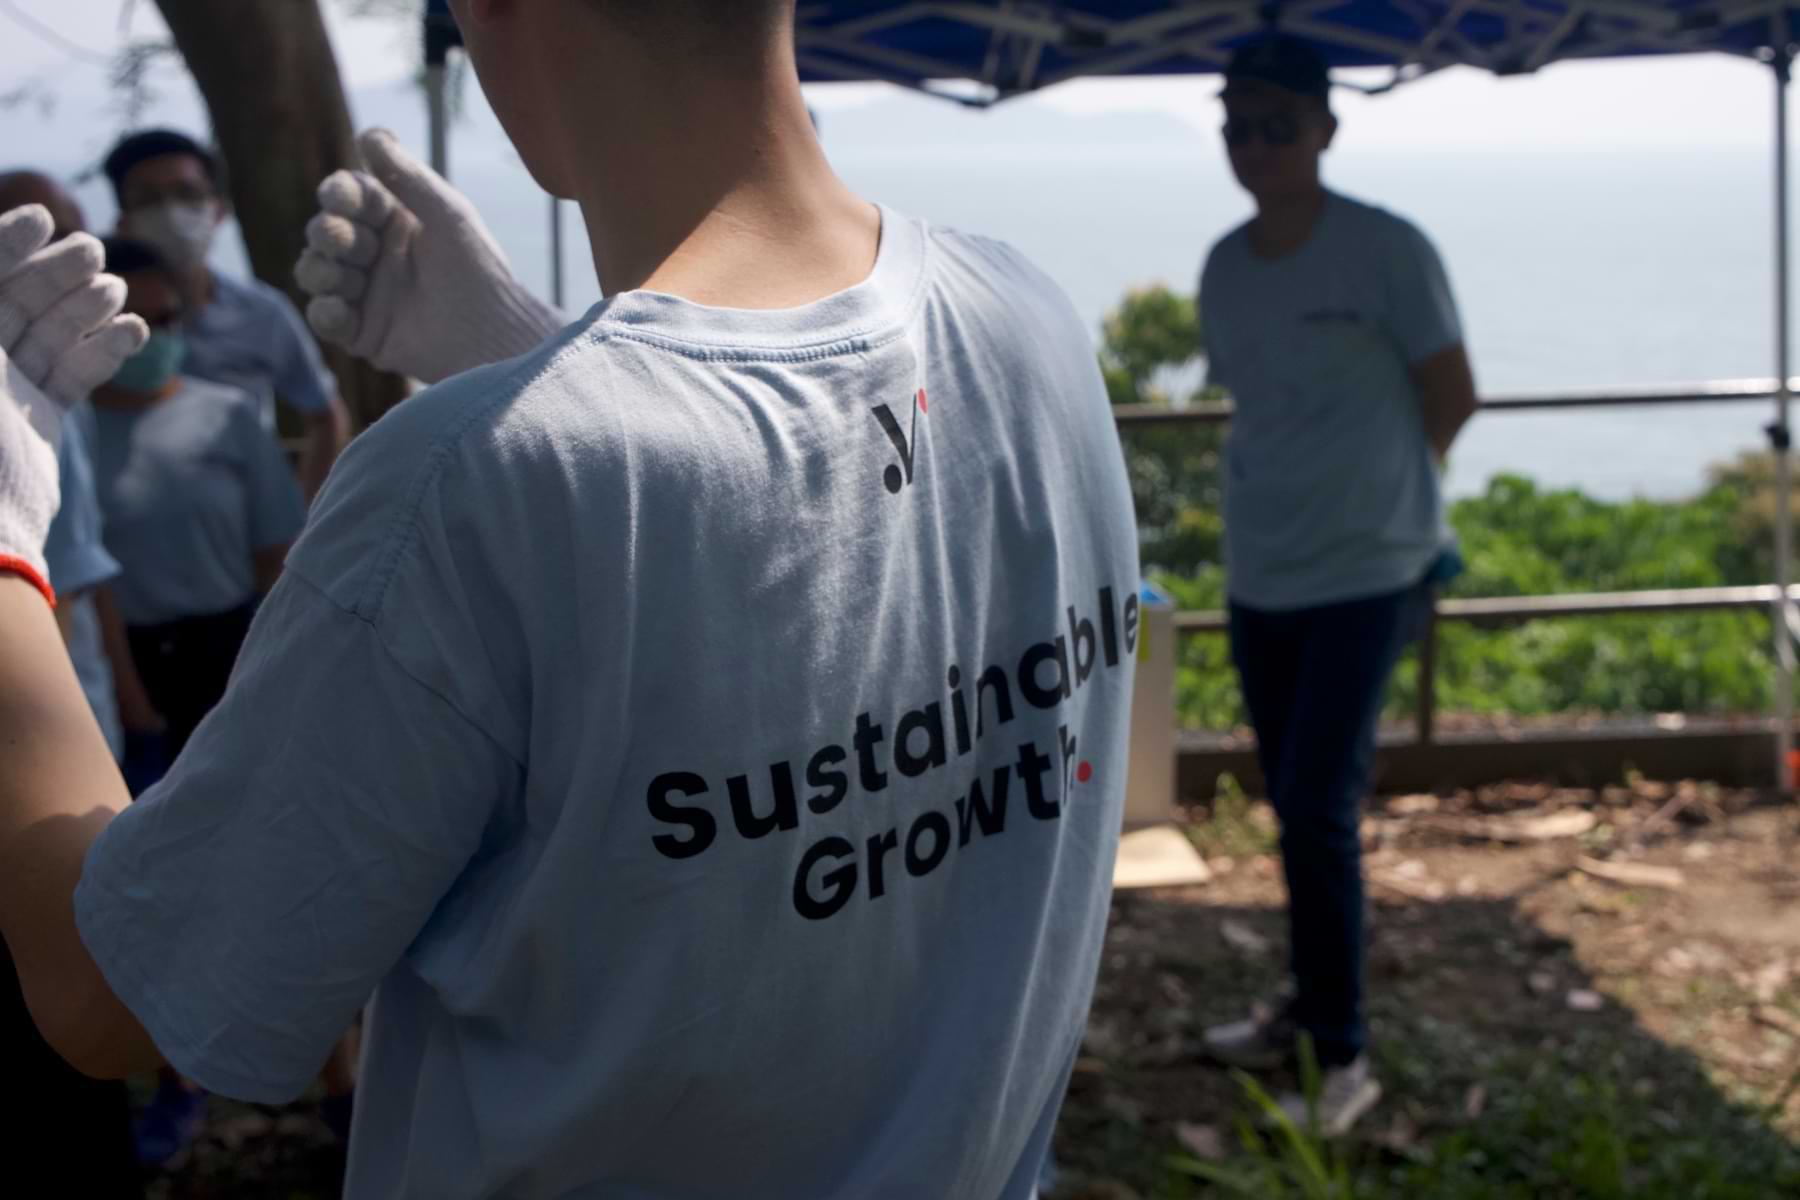 Close-up shot of Velotrade team member wearing a tee with logo and tagline "Sustainable Growth".